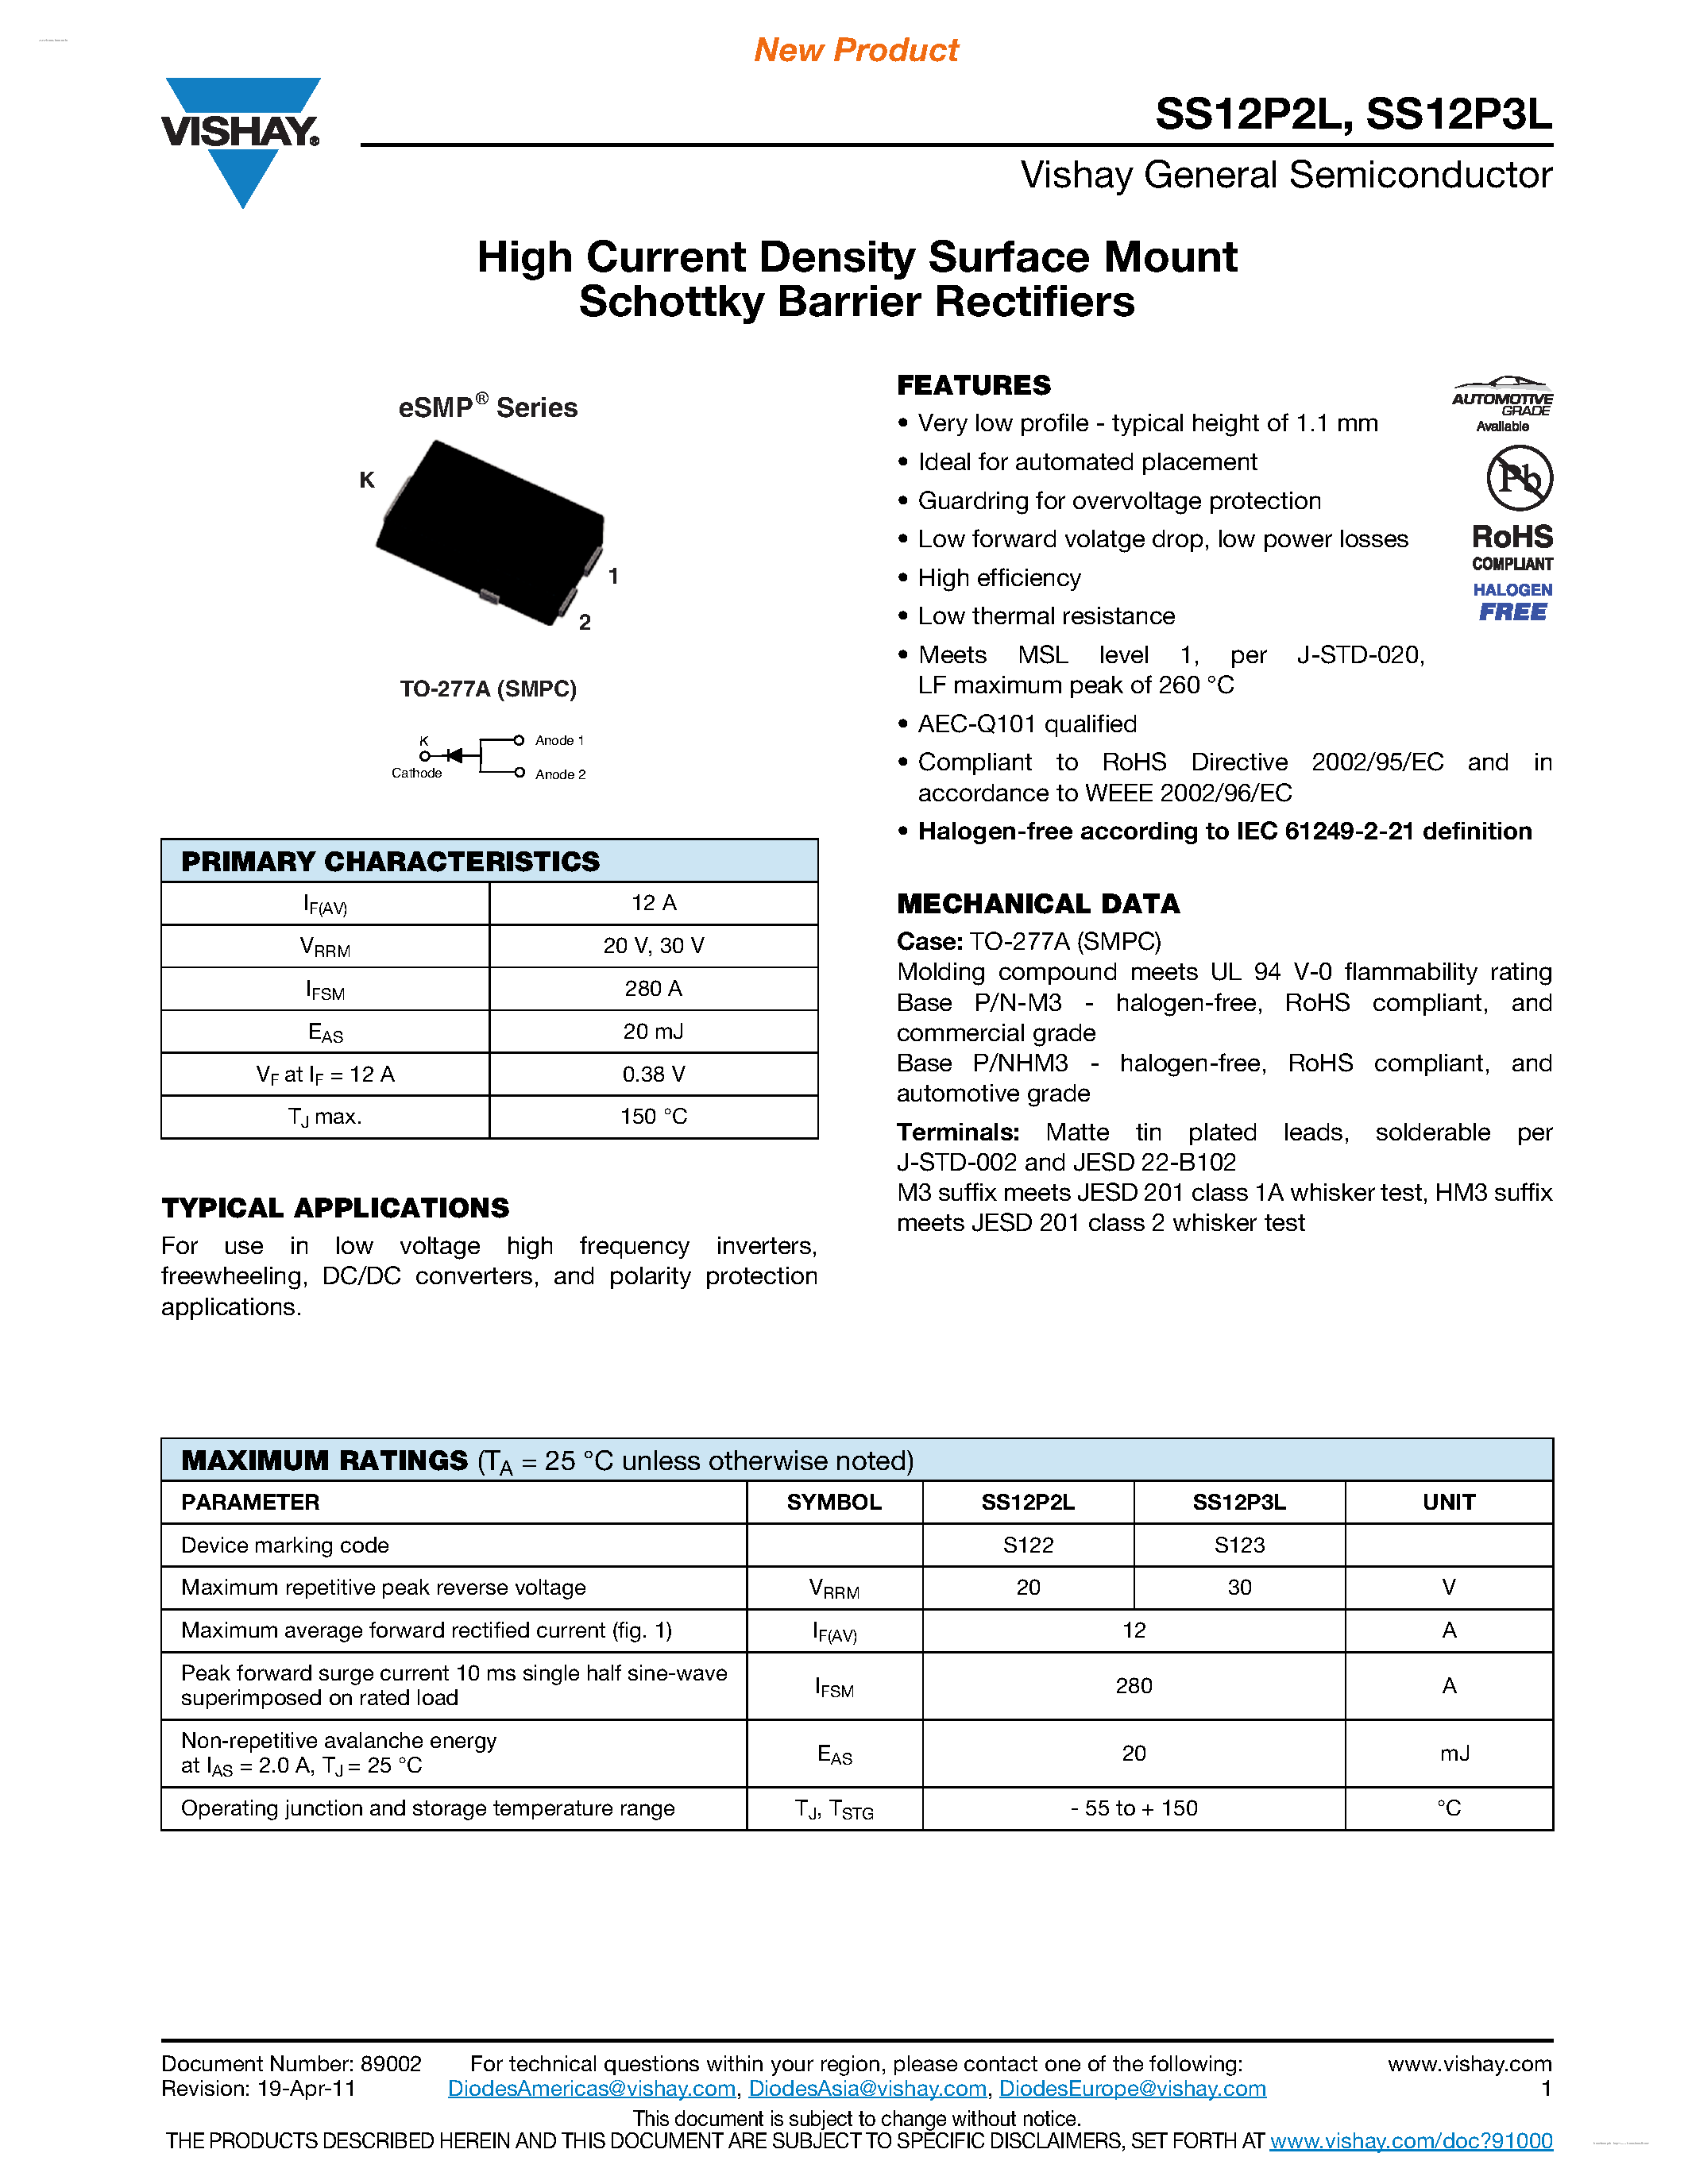 Datasheet SS12P2L - (SS12P2L / SS12P3L) High Current Density Surface Mount Schottky Barrier Rectifiers page 1